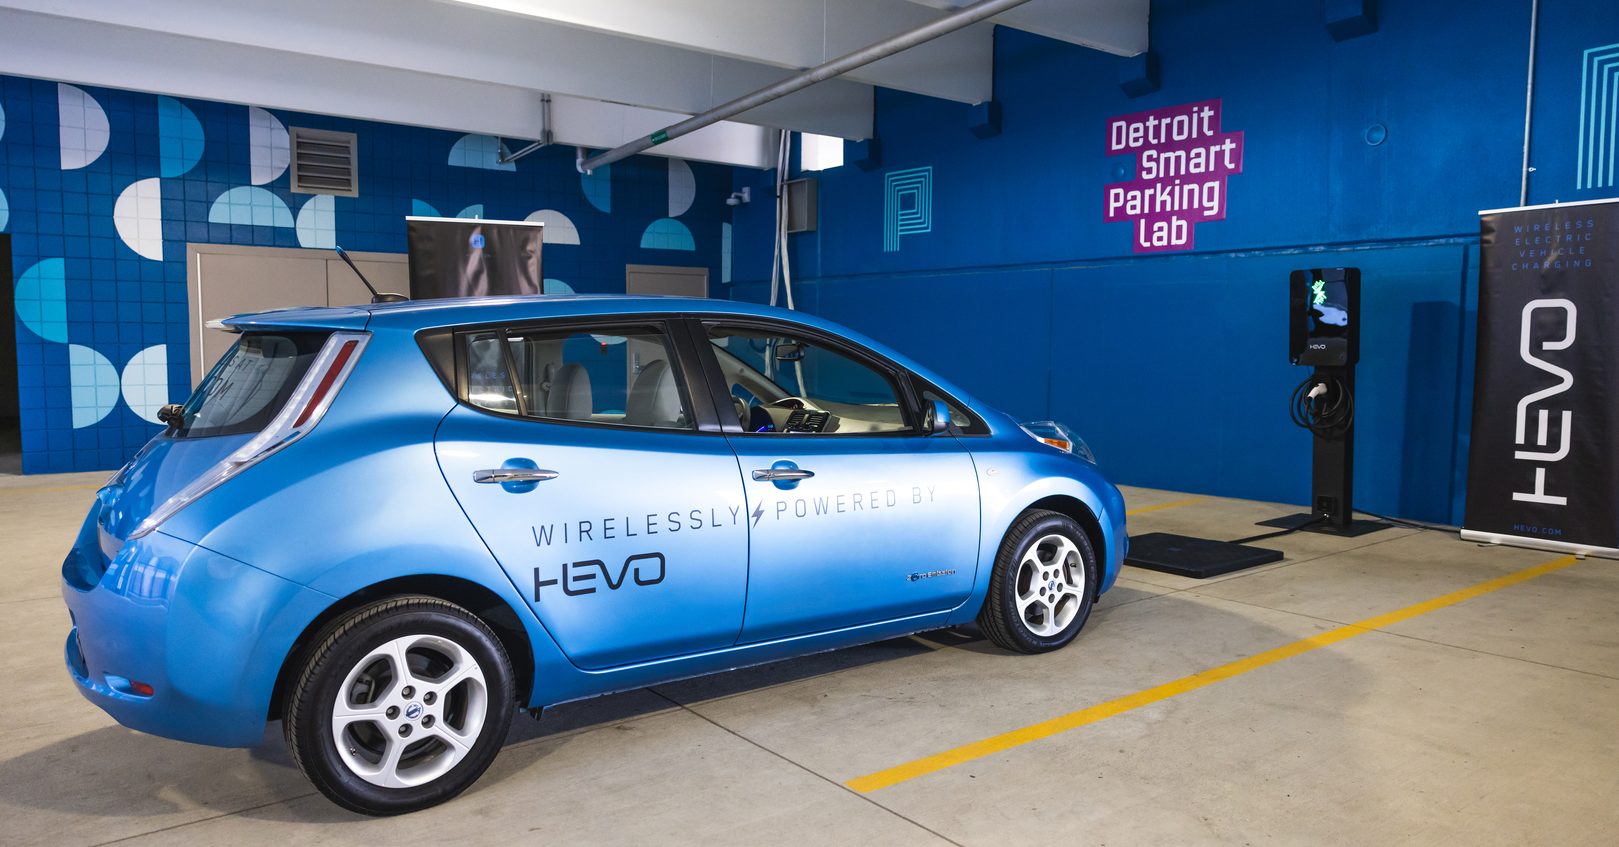 INNOVATION Automated Electric Vehicle Charging at the Detroit Smart